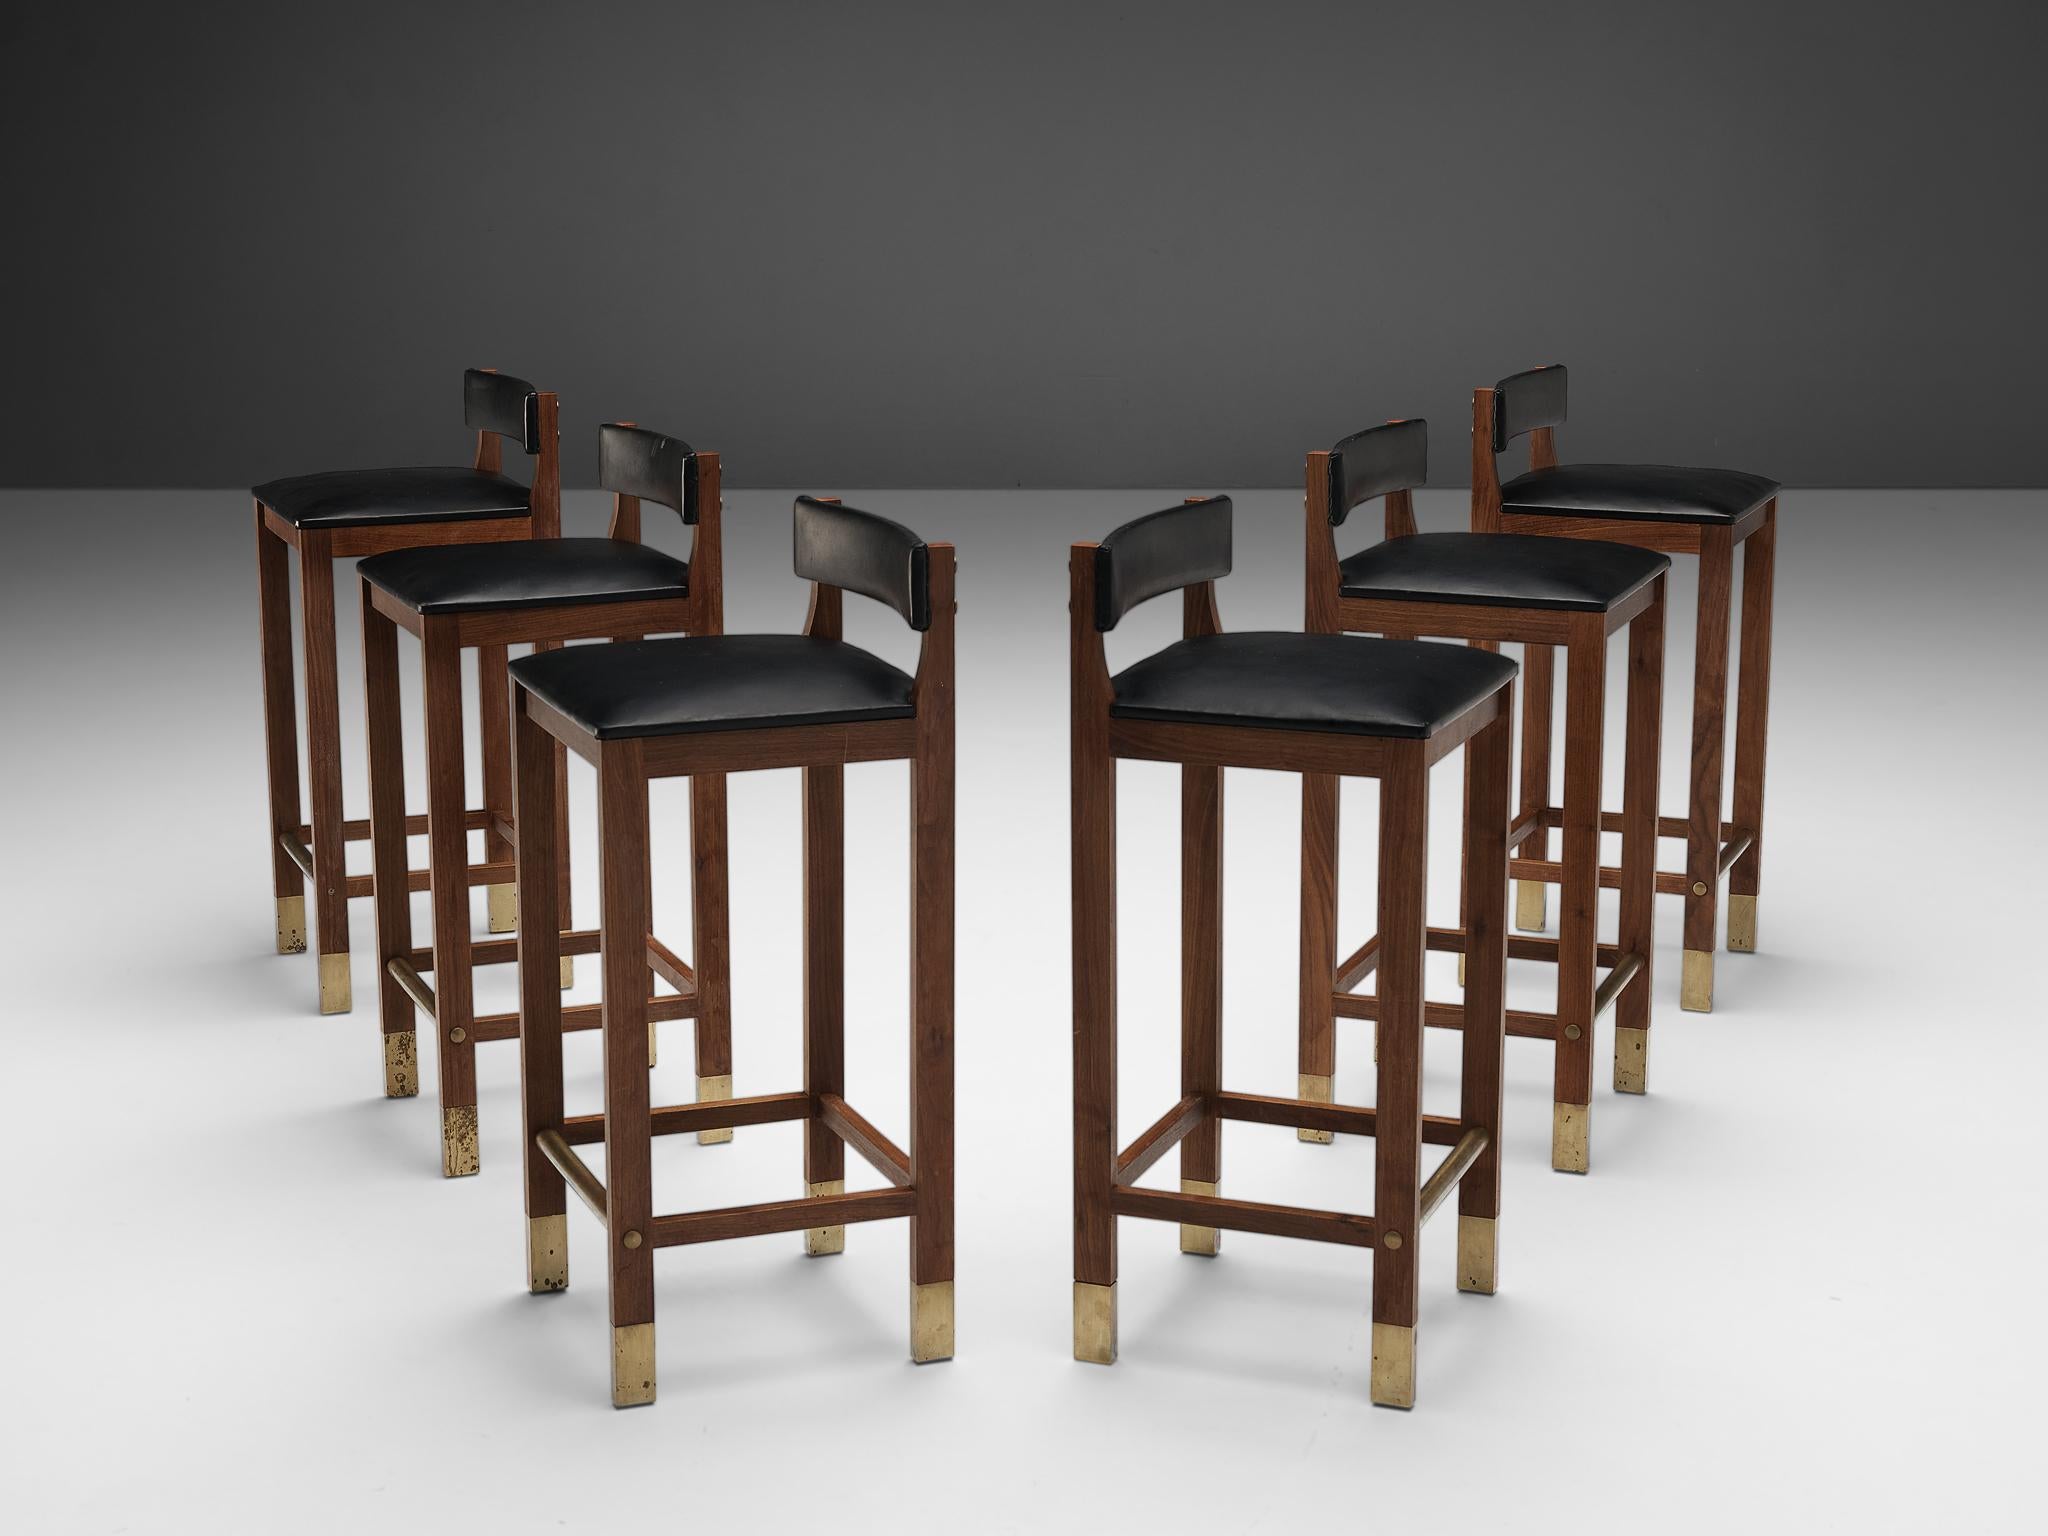 Set of six Danish bar stools, teak, brass, leatherette, Denmark, 1960s

This set of six Danish bar stools shows a strong design that features brass feet on the teak frame as well as a brass footrest and black leatherette upholstered seats. The seat